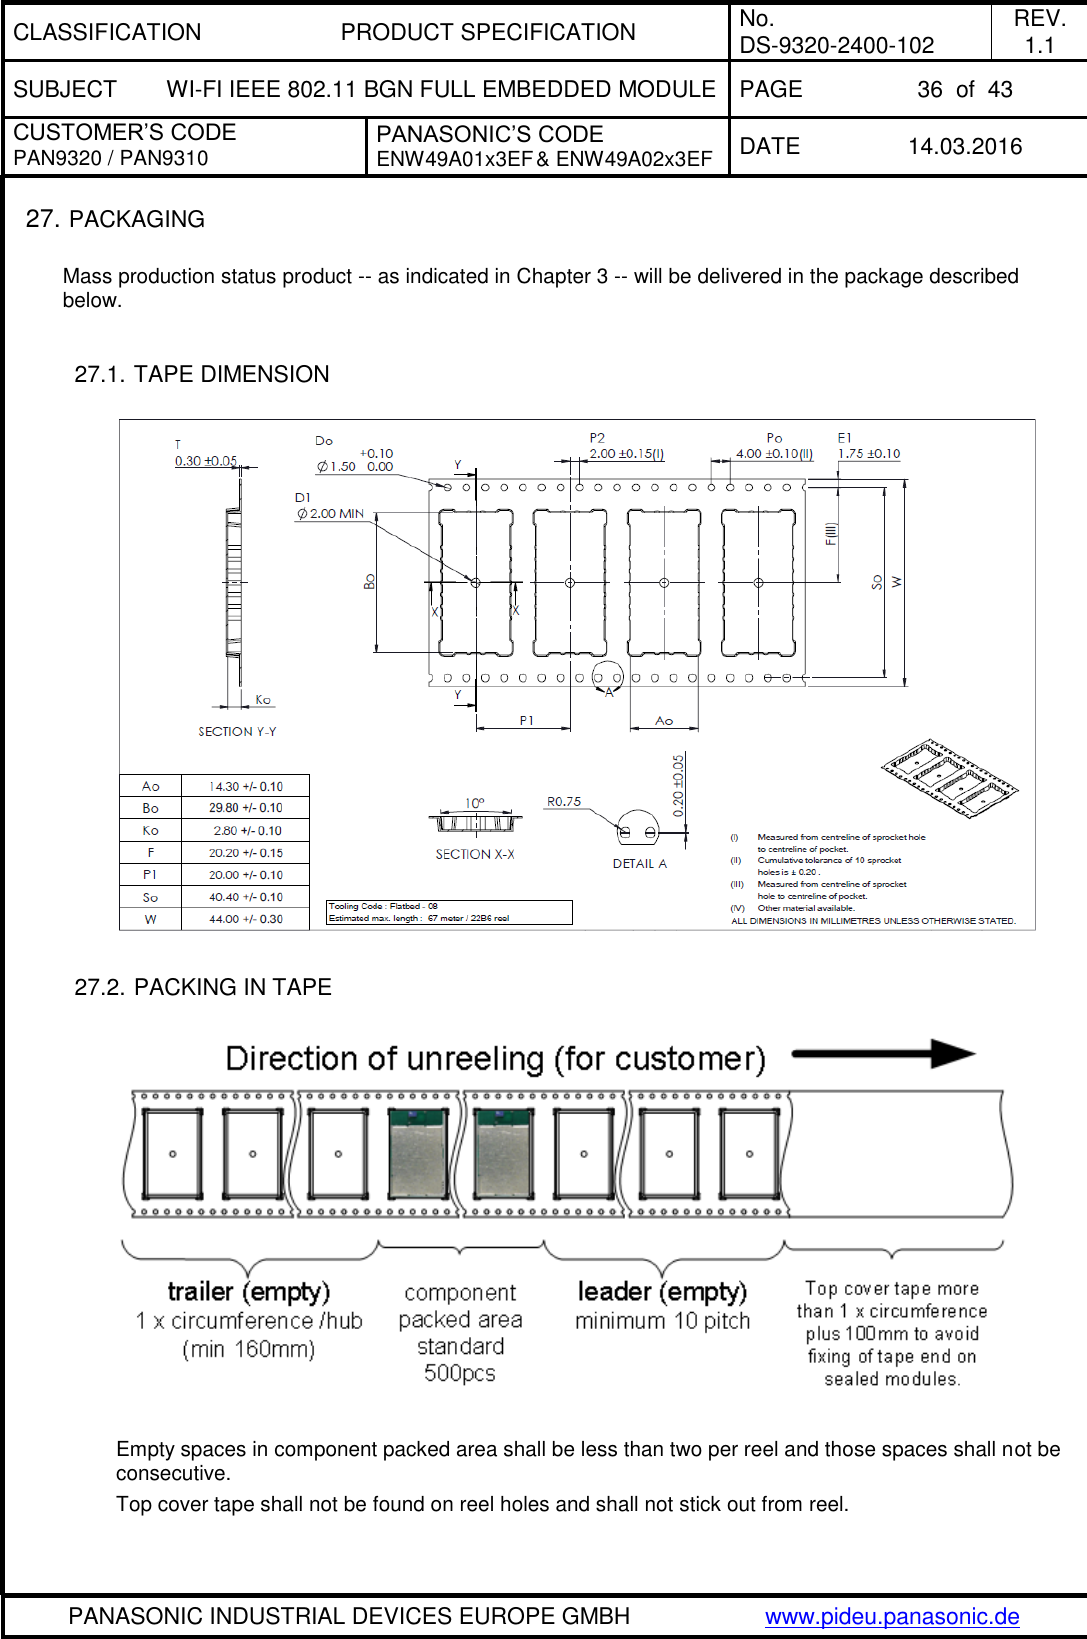 CLASSIFICATION PRODUCT SPECIFICATION No. DS-9320-2400-102 REV. 1.1 SUBJECT WI-FI IEEE 802.11 BGN FULL EMBEDDED MODULE PAGE 36  of  43 CUSTOMER’S CODE PAN9320 / PAN9310 PANASONIC’S CODE ENW49A01x3EF &amp; ENW49A02x3EF DATE 14.03.2016   PANASONIC INDUSTRIAL DEVICES EUROPE GMBH www.pideu.panasonic.de  27. PACKAGING  Mass production status product -- as indicated in Chapter 3 -- will be delivered in the package described below.  27.1. TAPE DIMENSION        27.2. PACKING IN TAPE    Empty spaces in component packed area shall be less than two per reel and those spaces shall not be consecutive. Top cover tape shall not be found on reel holes and shall not stick out from reel. 